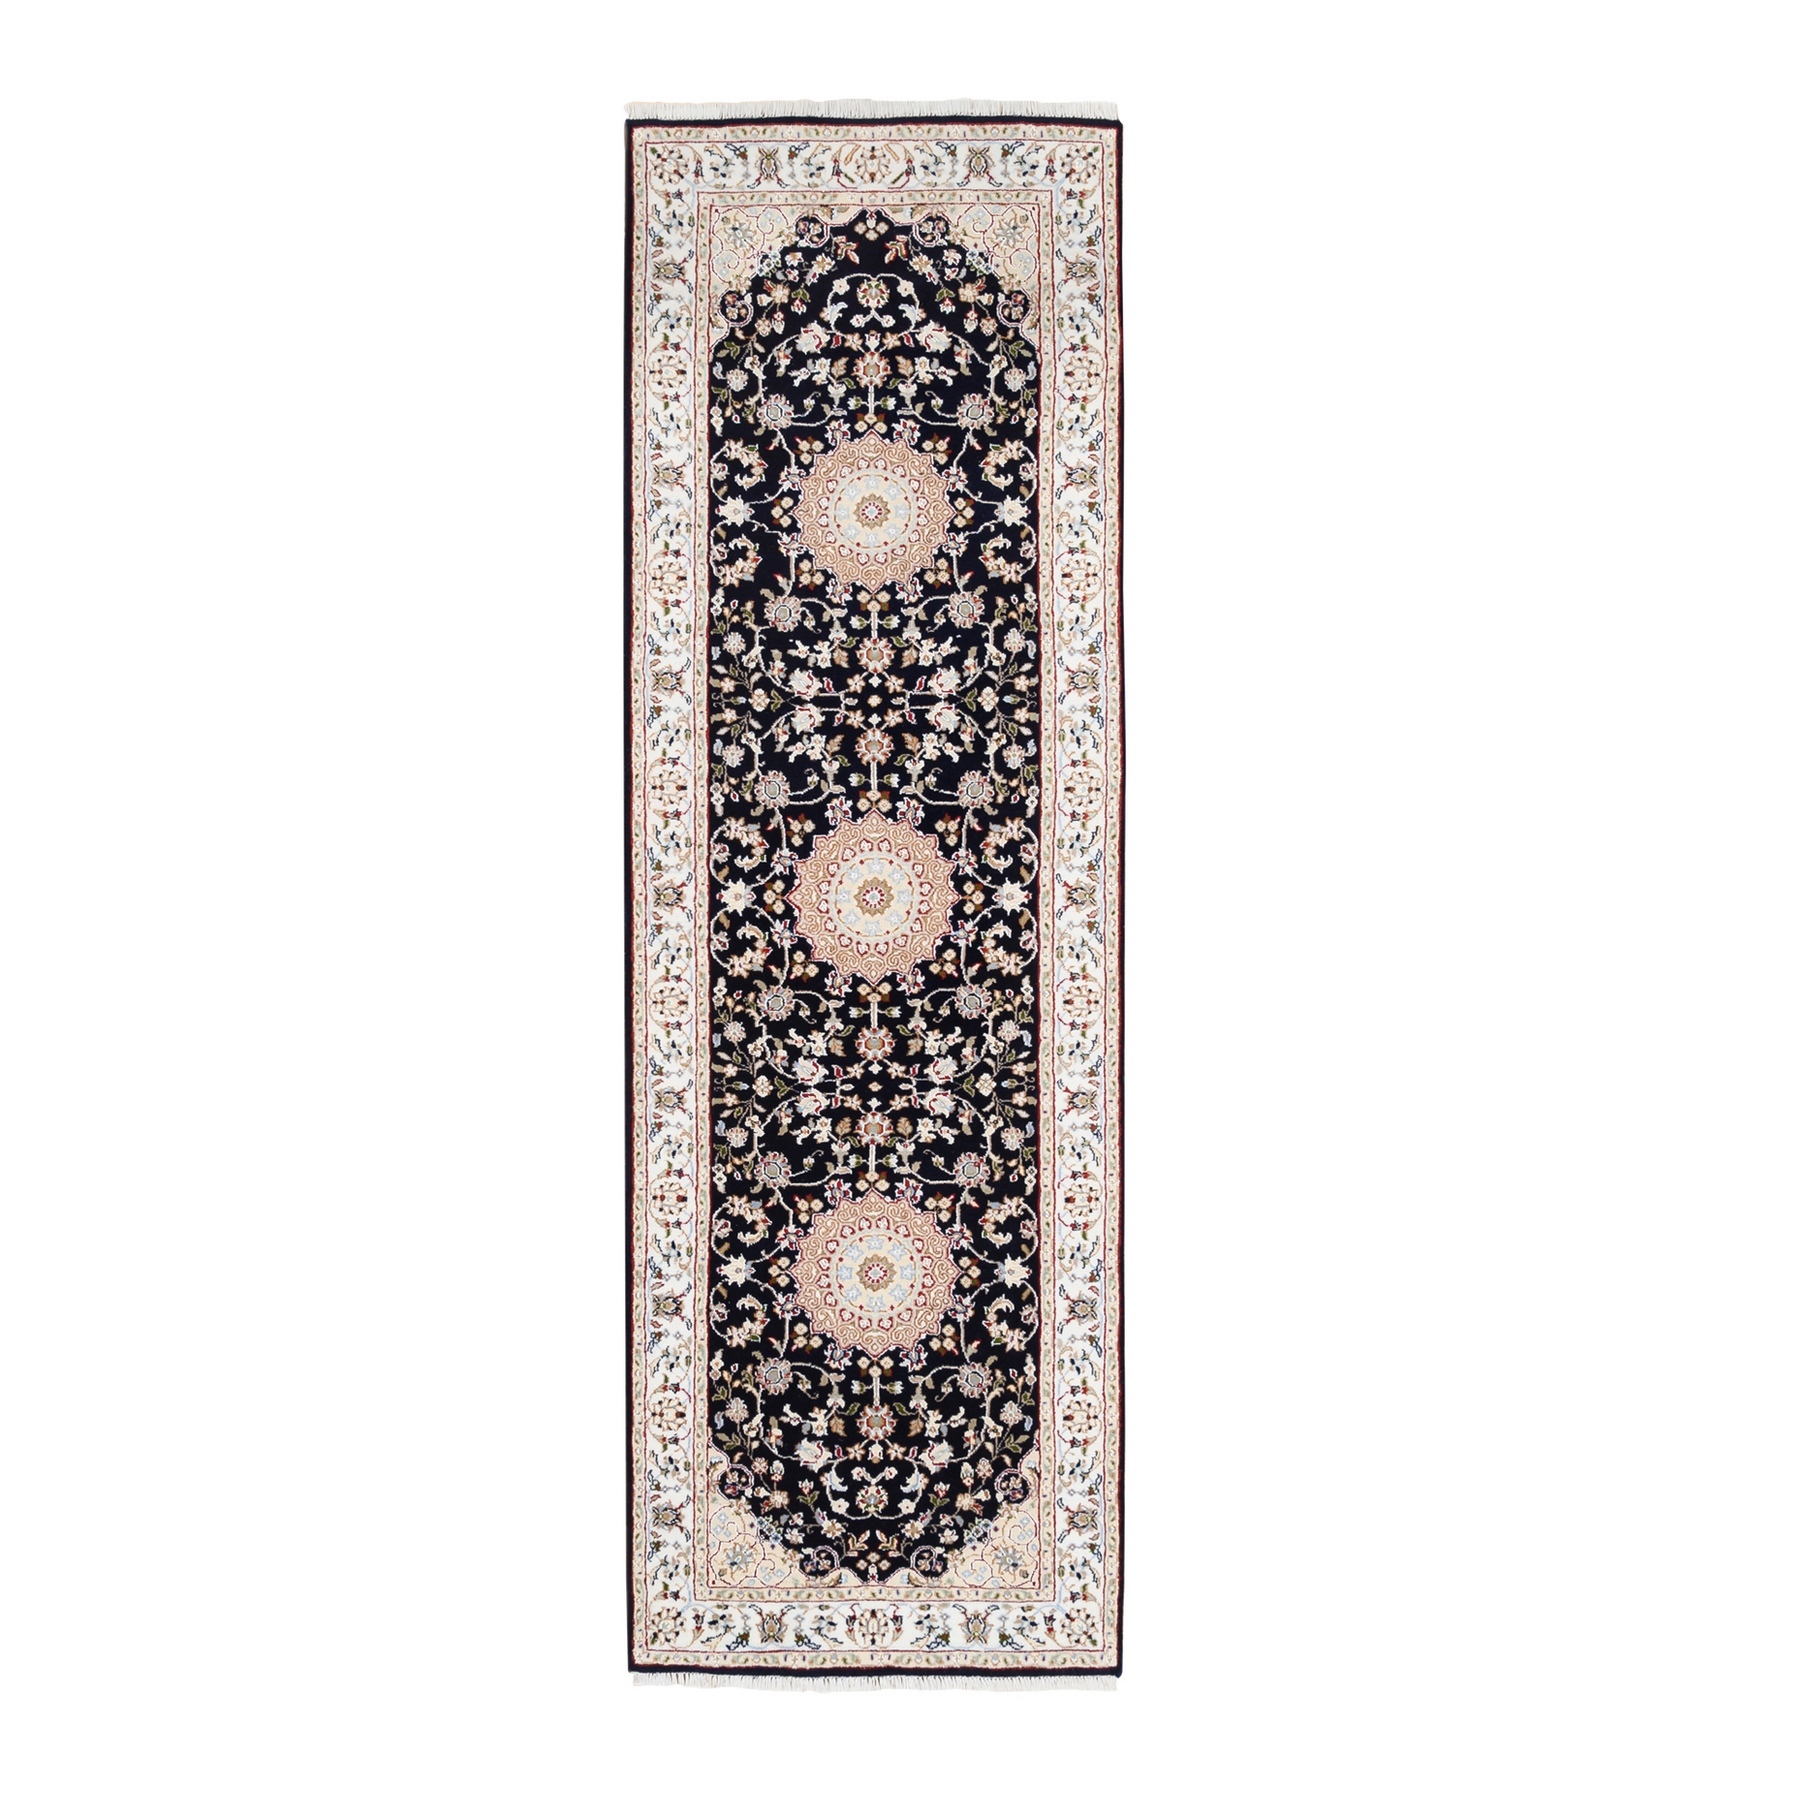 Pirniakan Collection Hand Knotted Blue Rug No: 1125554